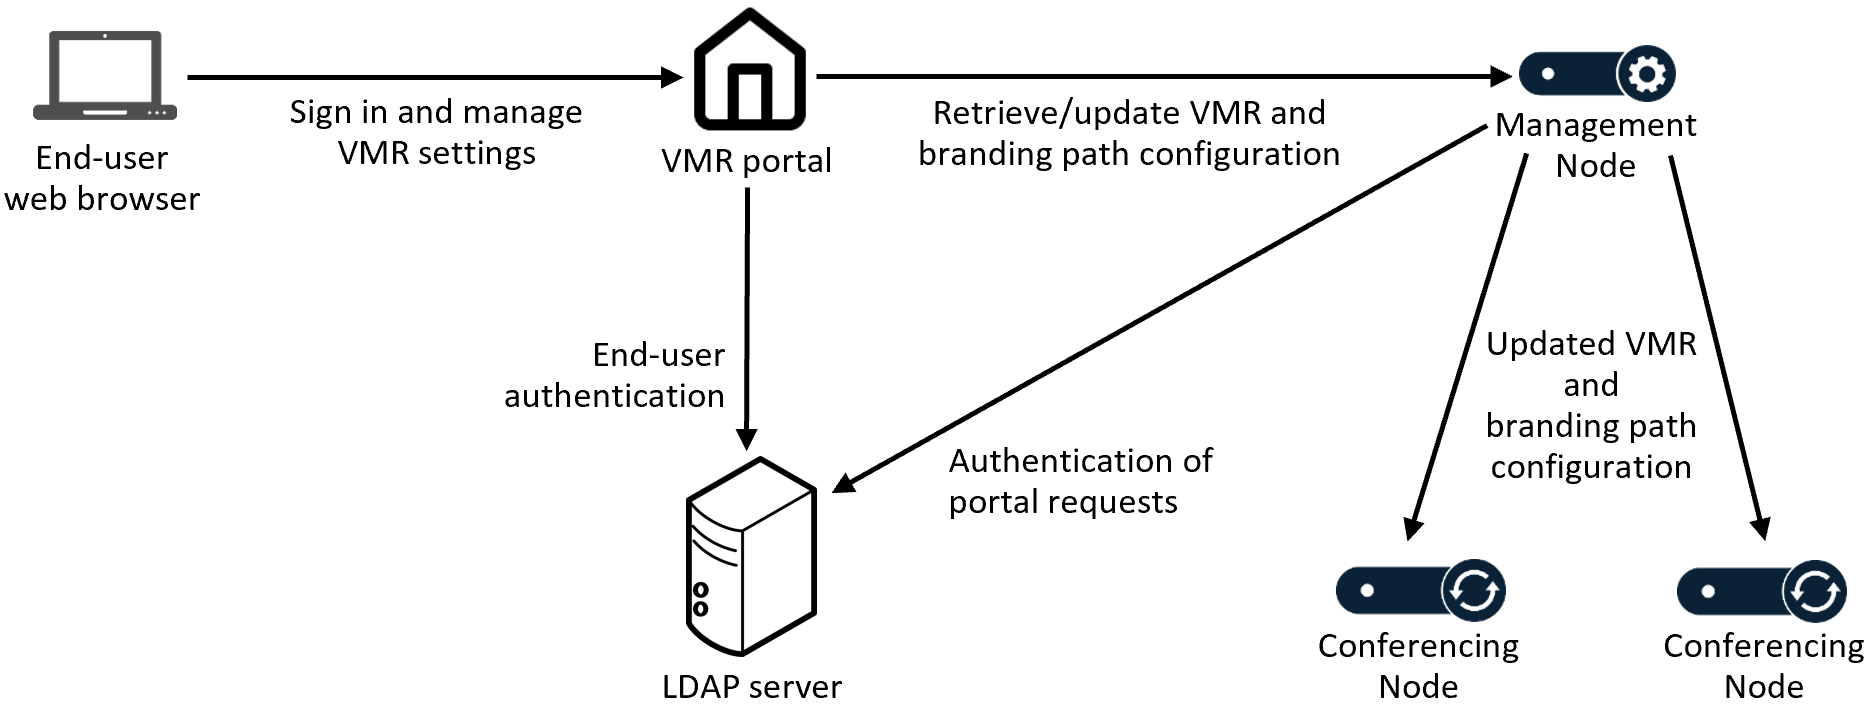 About the VMR self-service portal | Pexip Infinity Docs